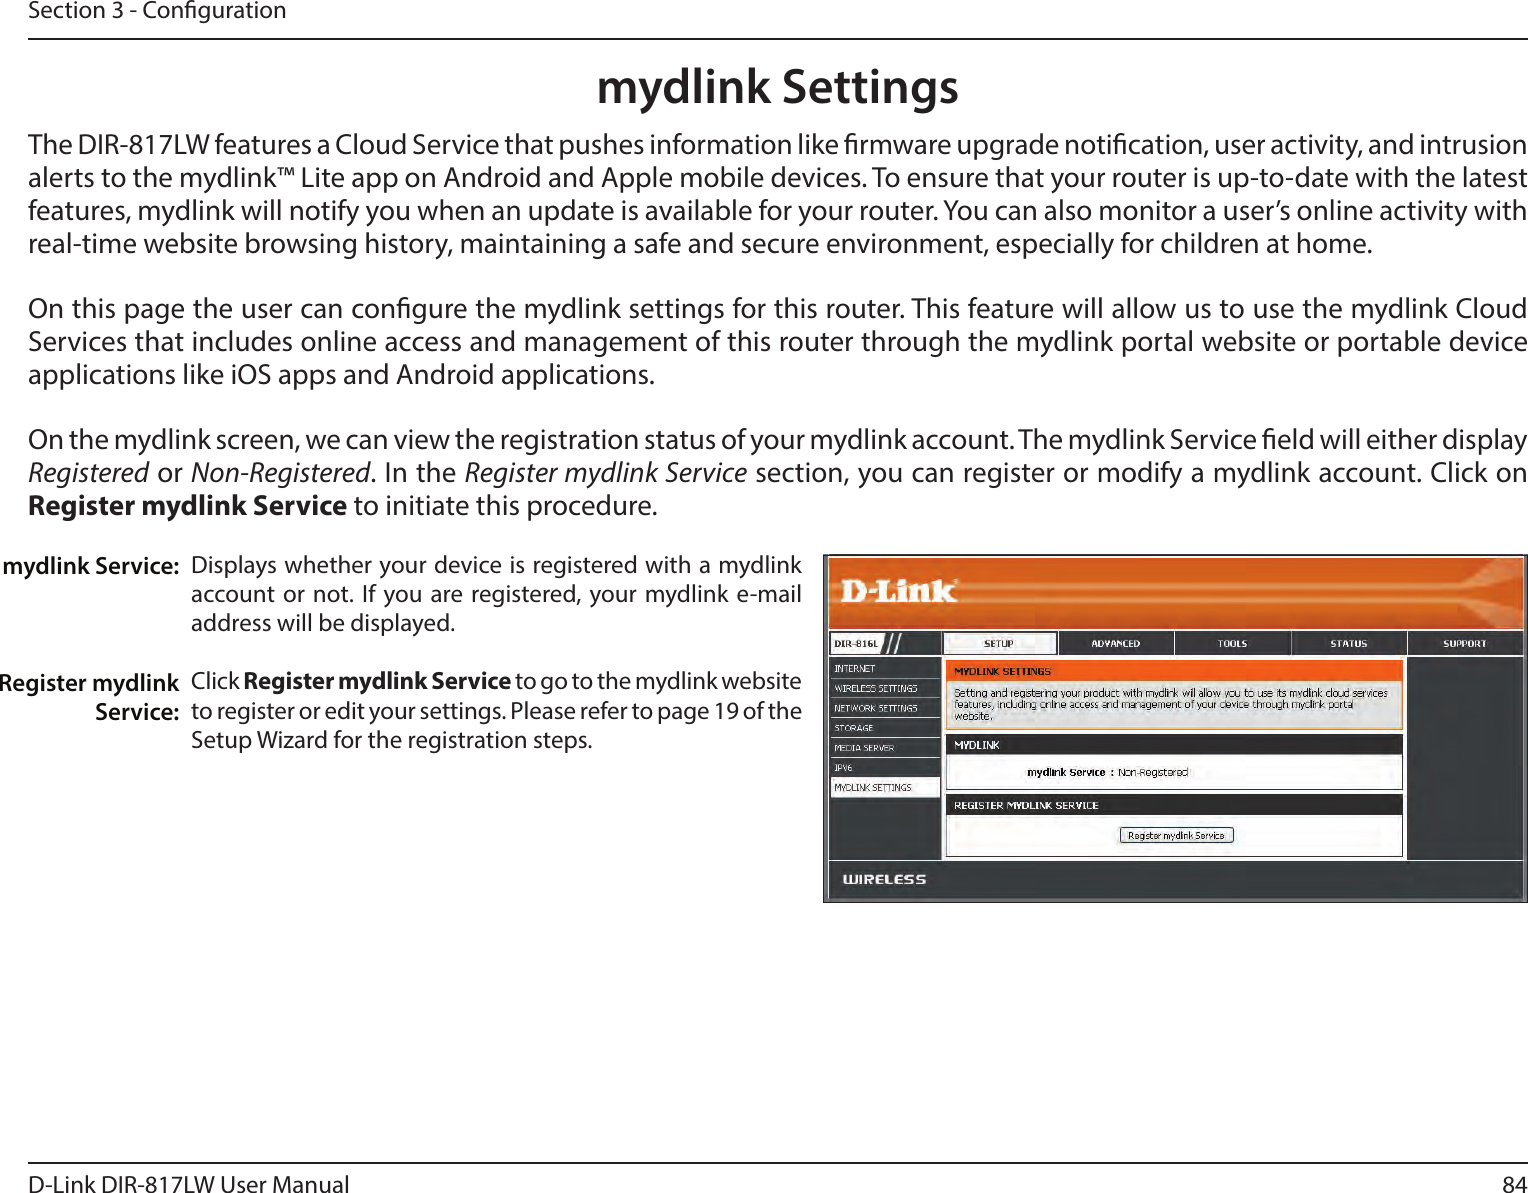 84D-Link DIR-817LW User ManualSection 3 - Congurationmydlink SettingsDisplays whether your device is registered with a mydlink account or not. If you are registered, your mydlink e-mail address will be displayed. Click Register mydlink Service to go to the mydlink website to register or edit your settings. Please refer to page 19 of the Setup Wizard for the registration steps.mydlink Service:Register mydlink Service:The DIR-817LW features a Cloud Service that pushes information like rmware upgrade notication, user activity, and intrusion alerts to the mydlink™ Lite app on Android and Apple mobile devices. To ensure that your router is up-to-date with the latest features, mydlink will notify you when an update is available for your router. You can also monitor a user’s online activity with real-time website browsing history, maintaining a safe and secure environment, especially for children at home.On this page the user can congure the mydlink settings for this router. This feature will allow us to use the mydlink Cloud Services that includes online access and management of this router through the mydlink portal website or portable device applications like iOS apps and Android applications.On the mydlink screen, we can view the registration status of your mydlink account. The mydlink Service eld will either display Registered or Non-Registered. In the Register mydlink Service section, you can register or modify a mydlink account. Click on Register mydlink Service to initiate this procedure.